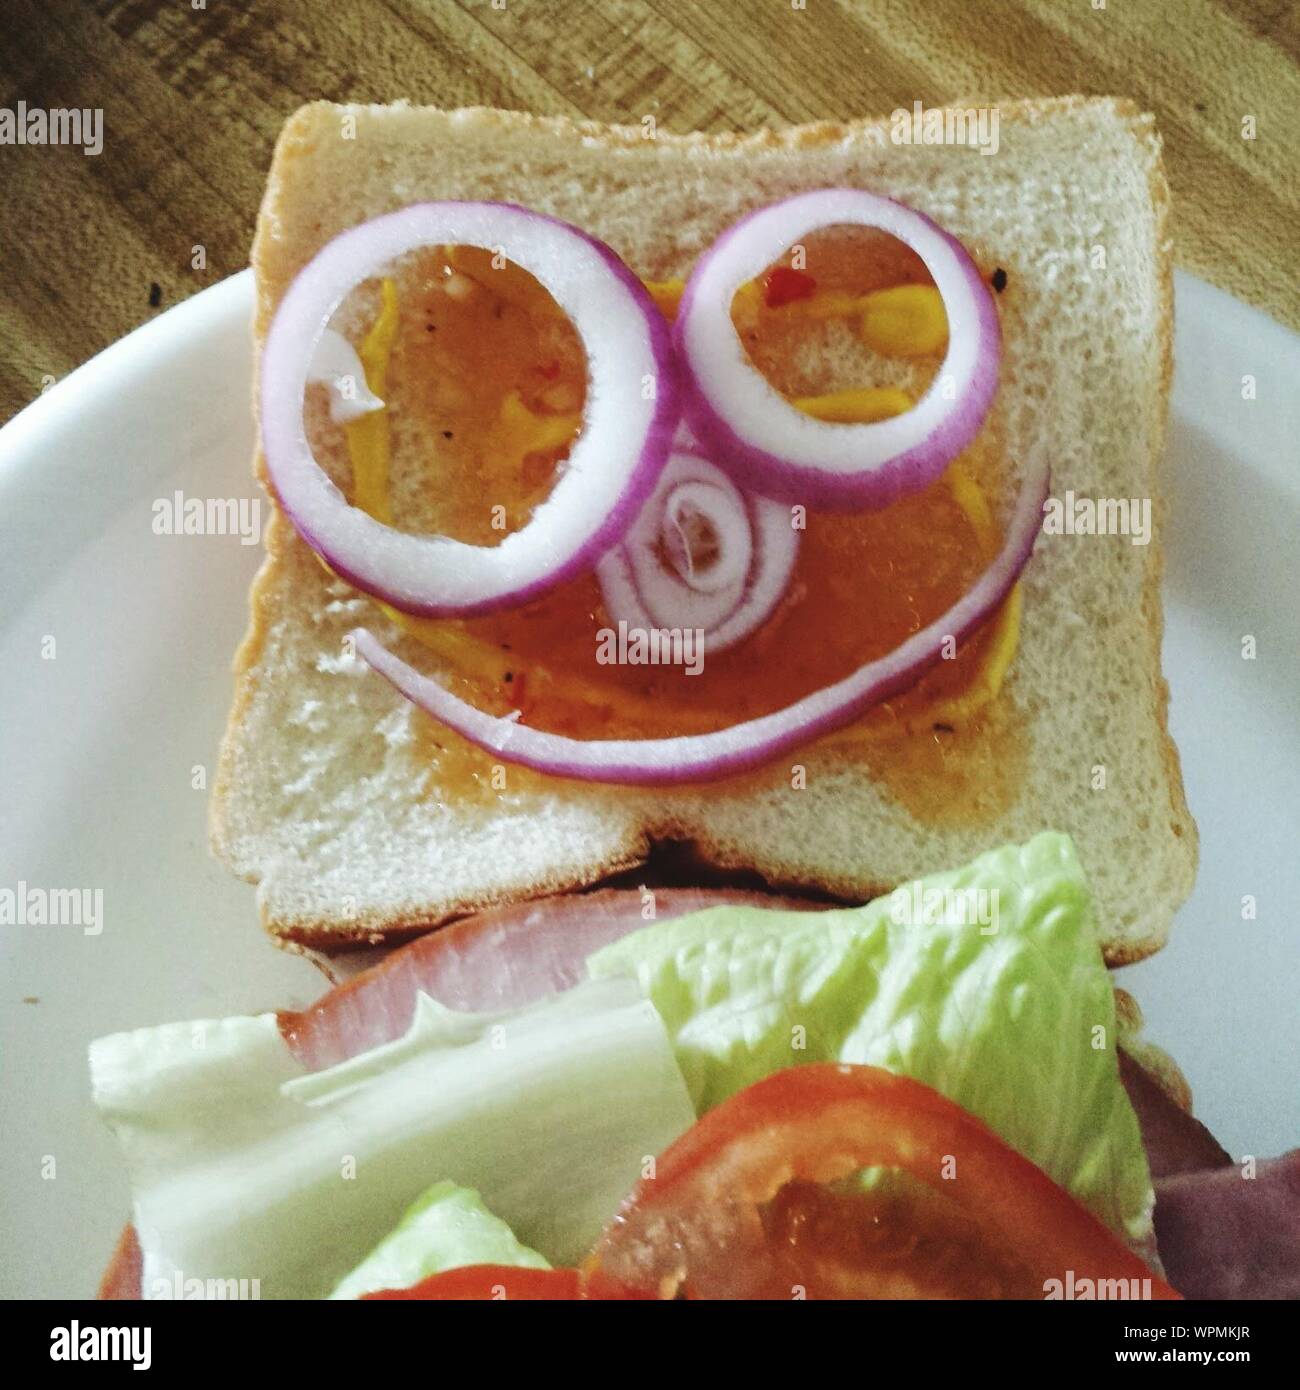 close-up-of-anthropomorphic-smiley-face-made-from-onion-slices-on-bread-WPMKJR.jpg